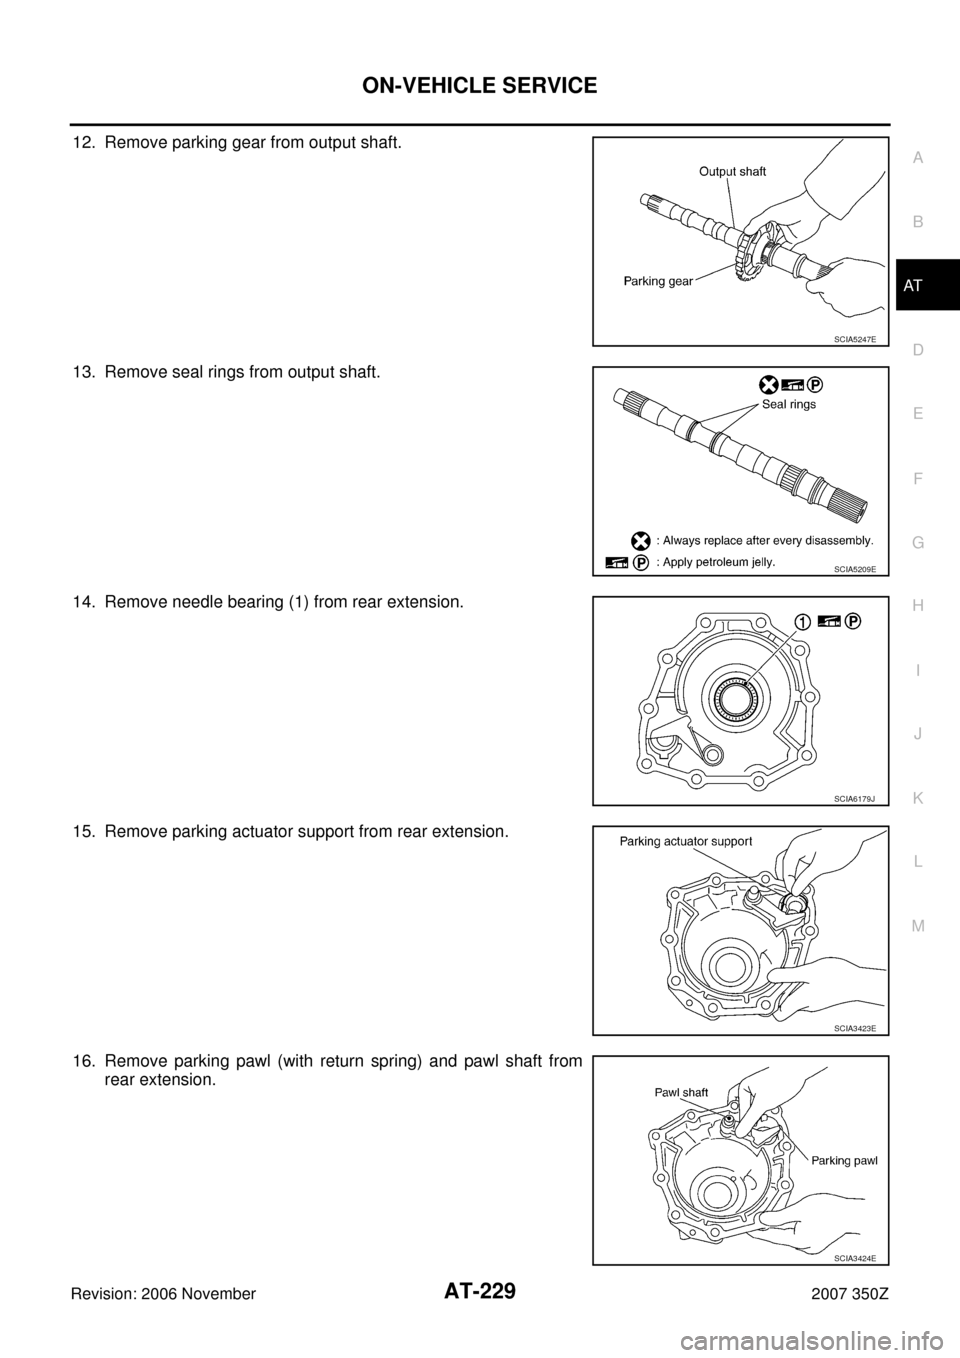 NISSAN 350Z 2007 Z33 Automatic Transmission Workshop Manual ON-VEHICLE SERVICE
AT-229
D
E
F
G
H
I
J
K
L
MA
B
AT
Revision: 2006 November2007 350Z
12. Remove parking gear from output shaft.
13. Remove seal rings from output shaft.
14. Remove needle bearing (1) f